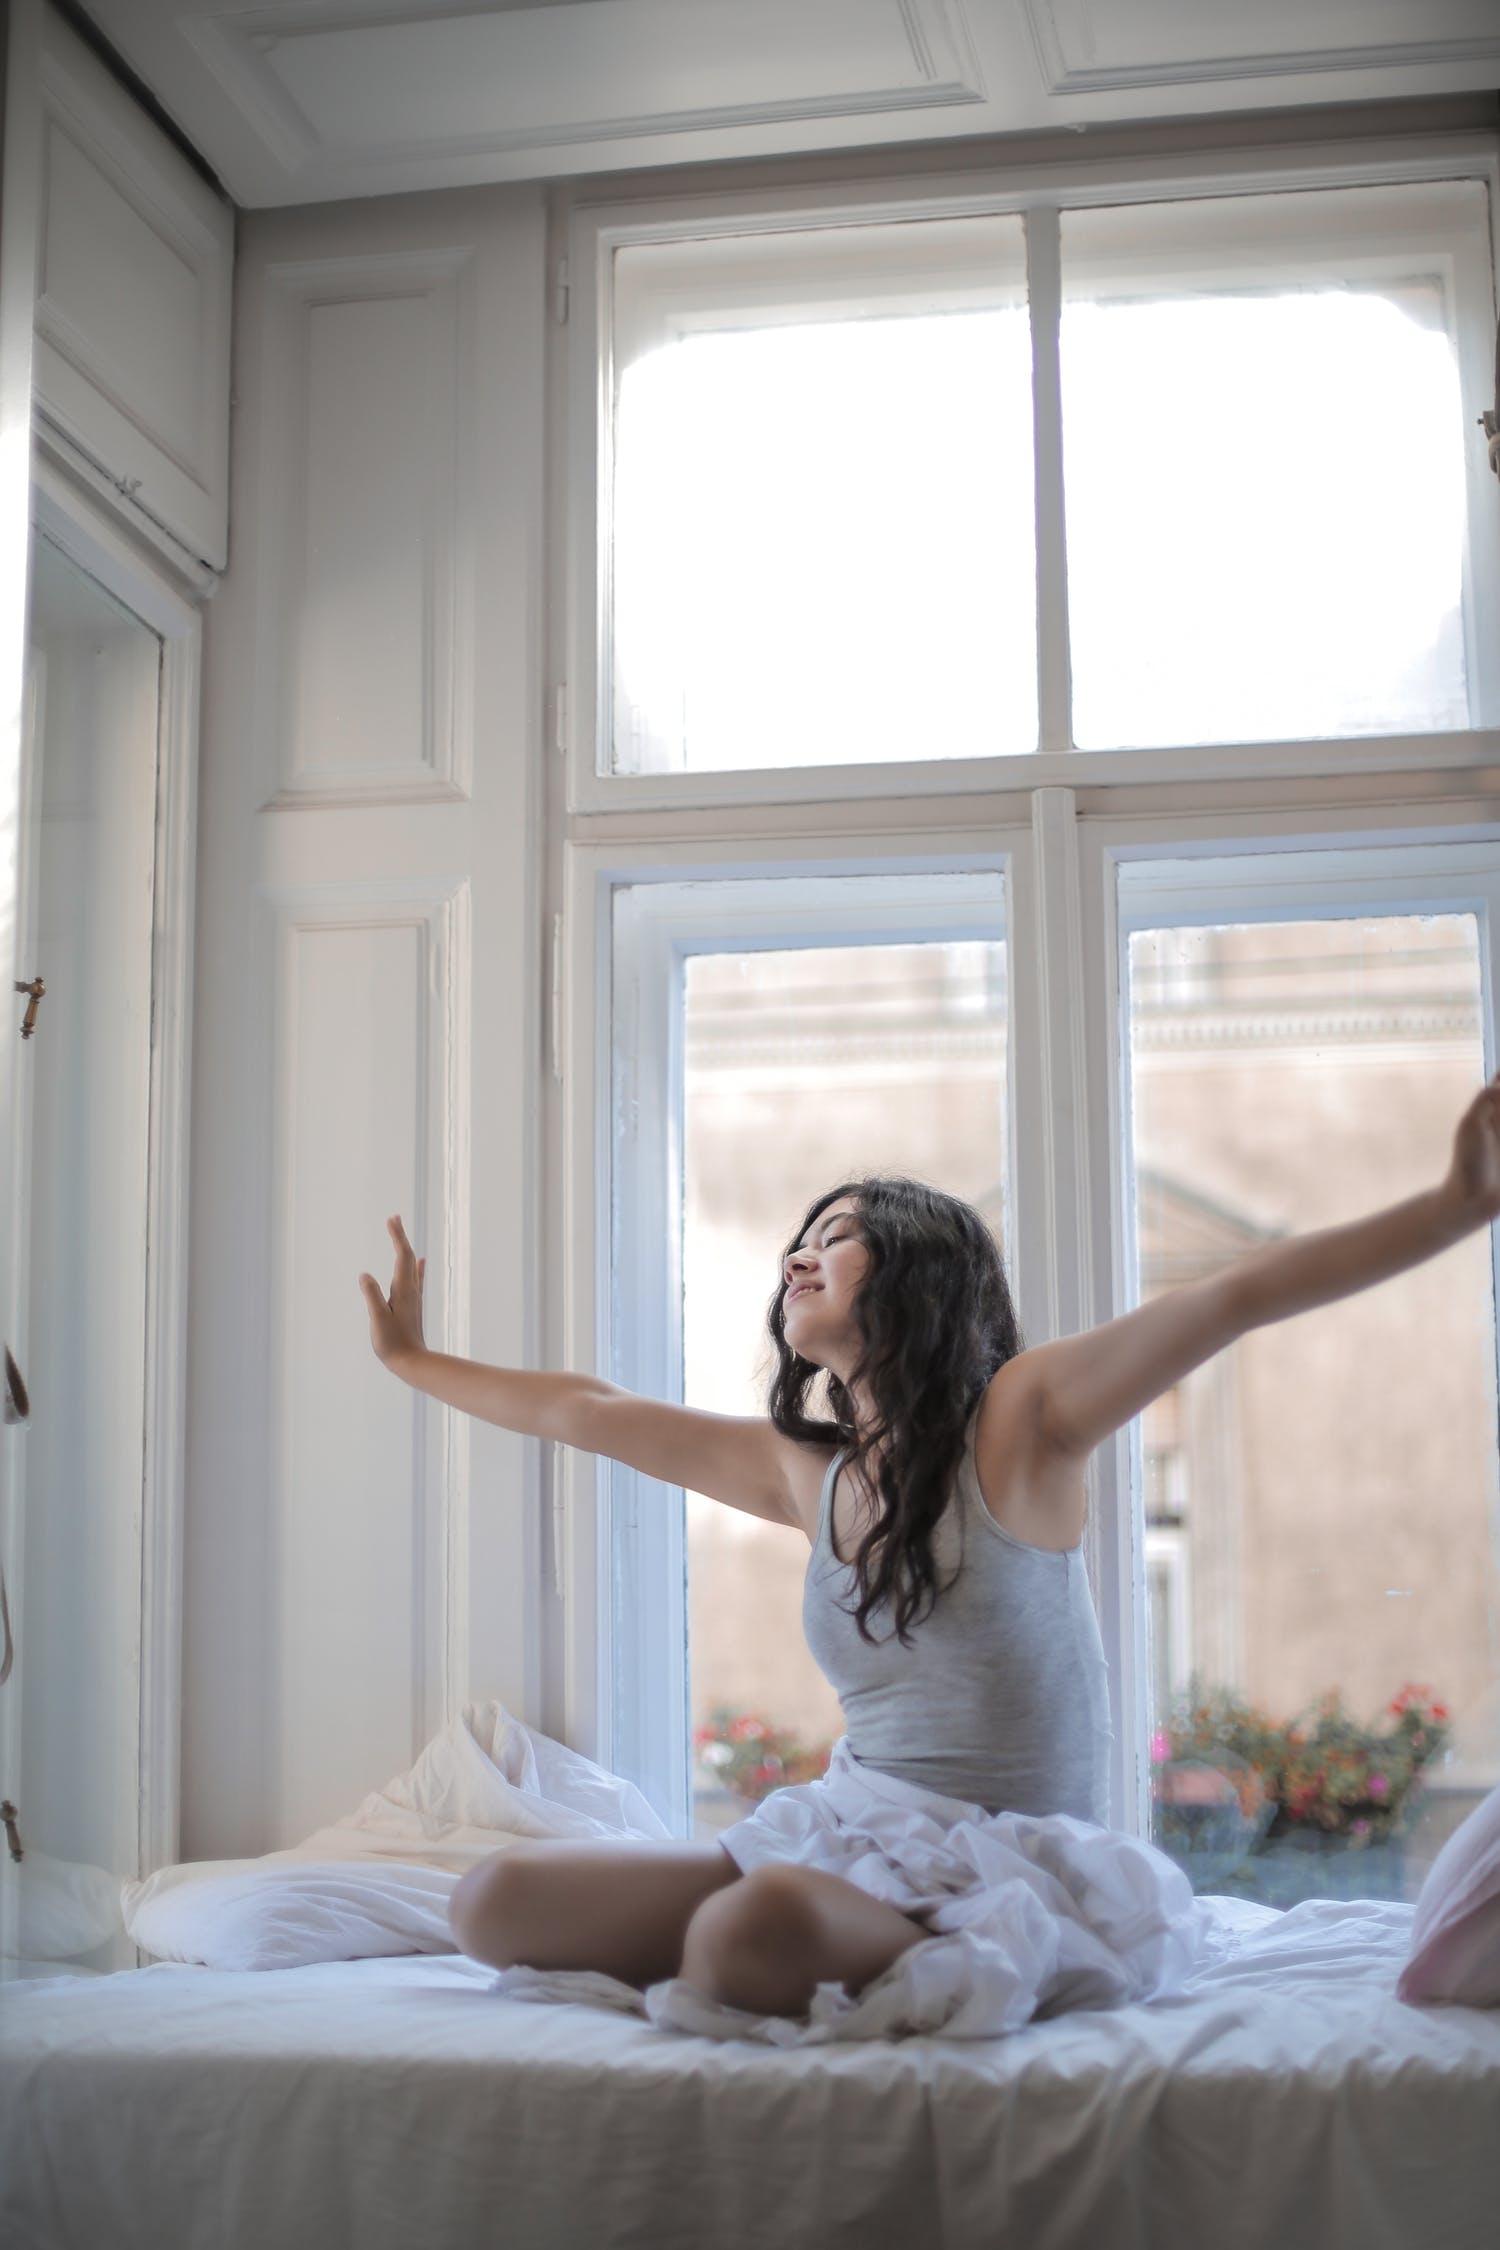 4 Benefits Of Waking Up Early